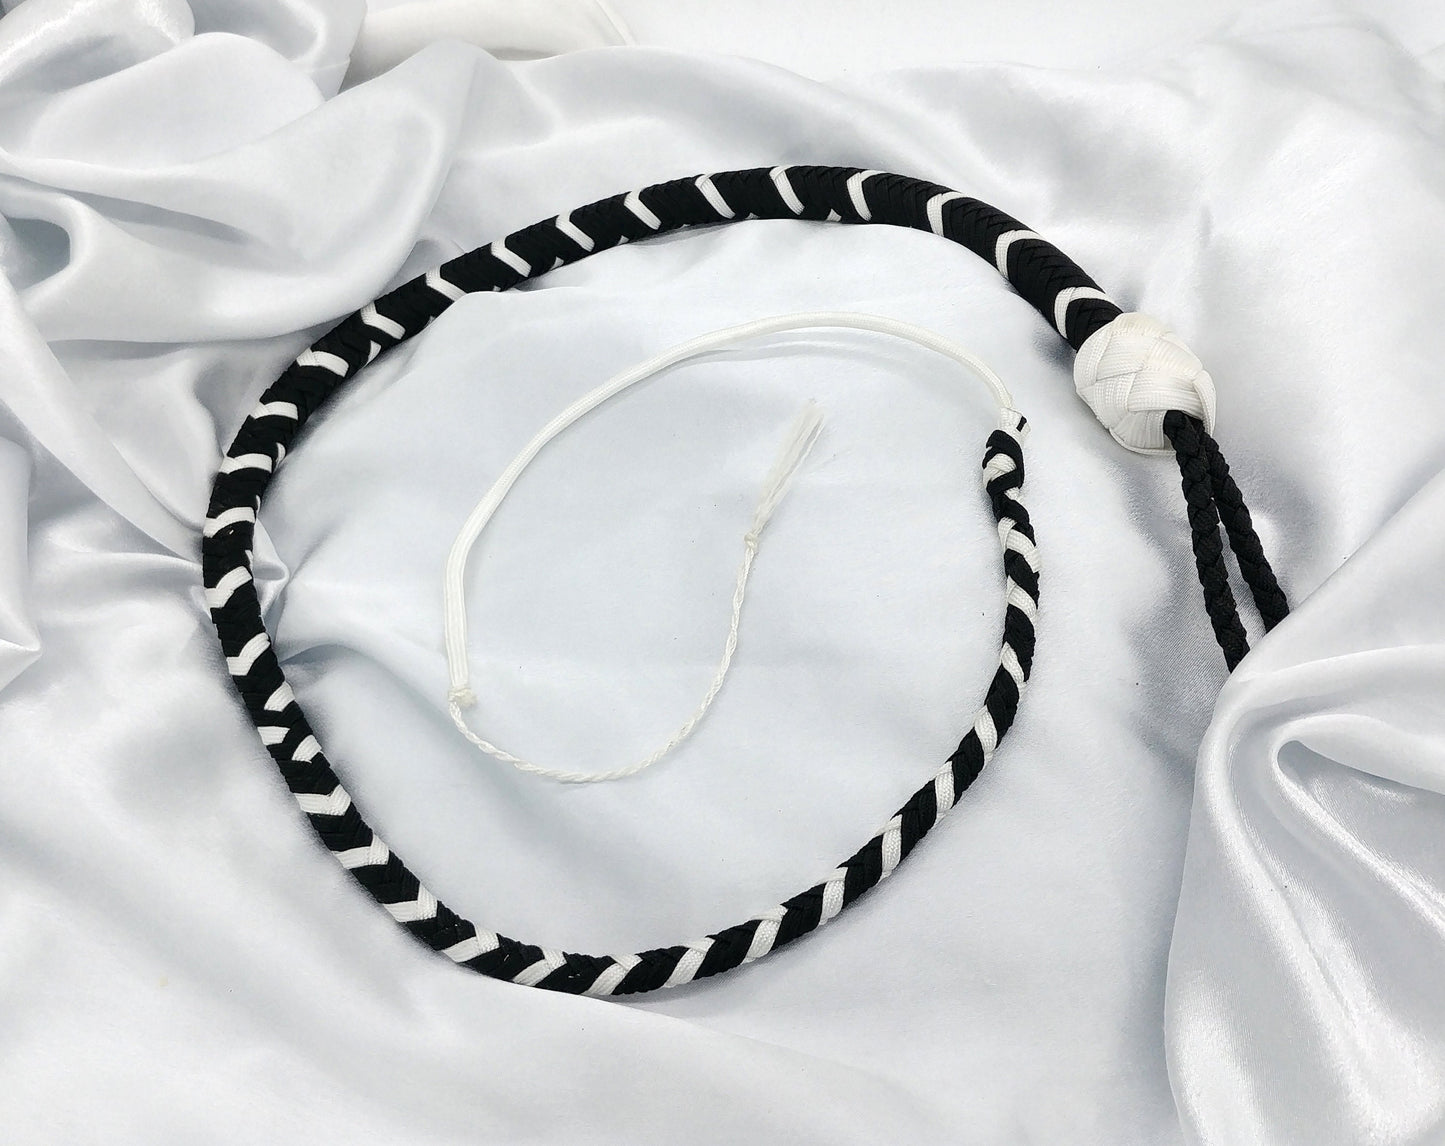 Black and white paracord whip